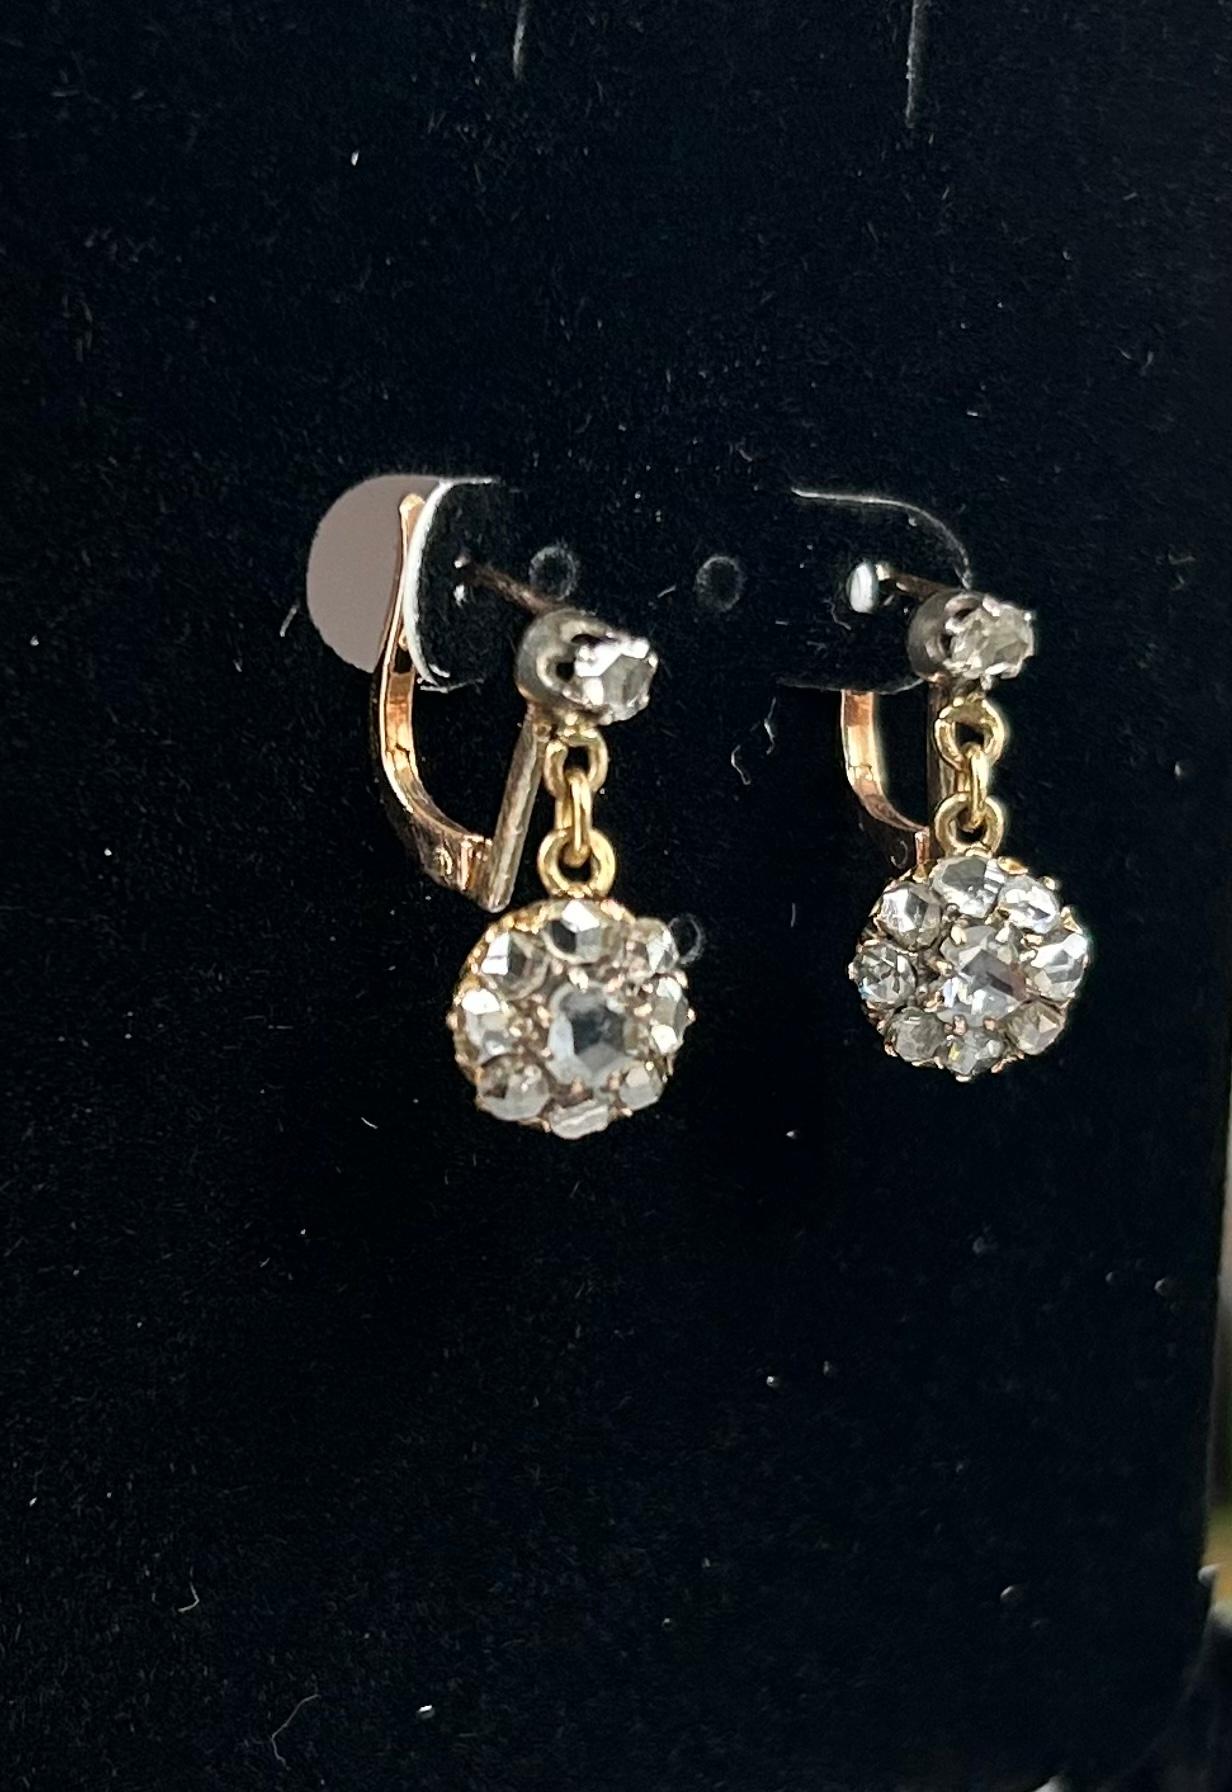 Charm of the Past, Brilliance of Today: Discover the enchanting beauty of our Victorian-era rose cut diamond drop earrings. These bewitching gray candlelight earrings, crafted during the late Victorian period, are timeless elegance.

Exquisite